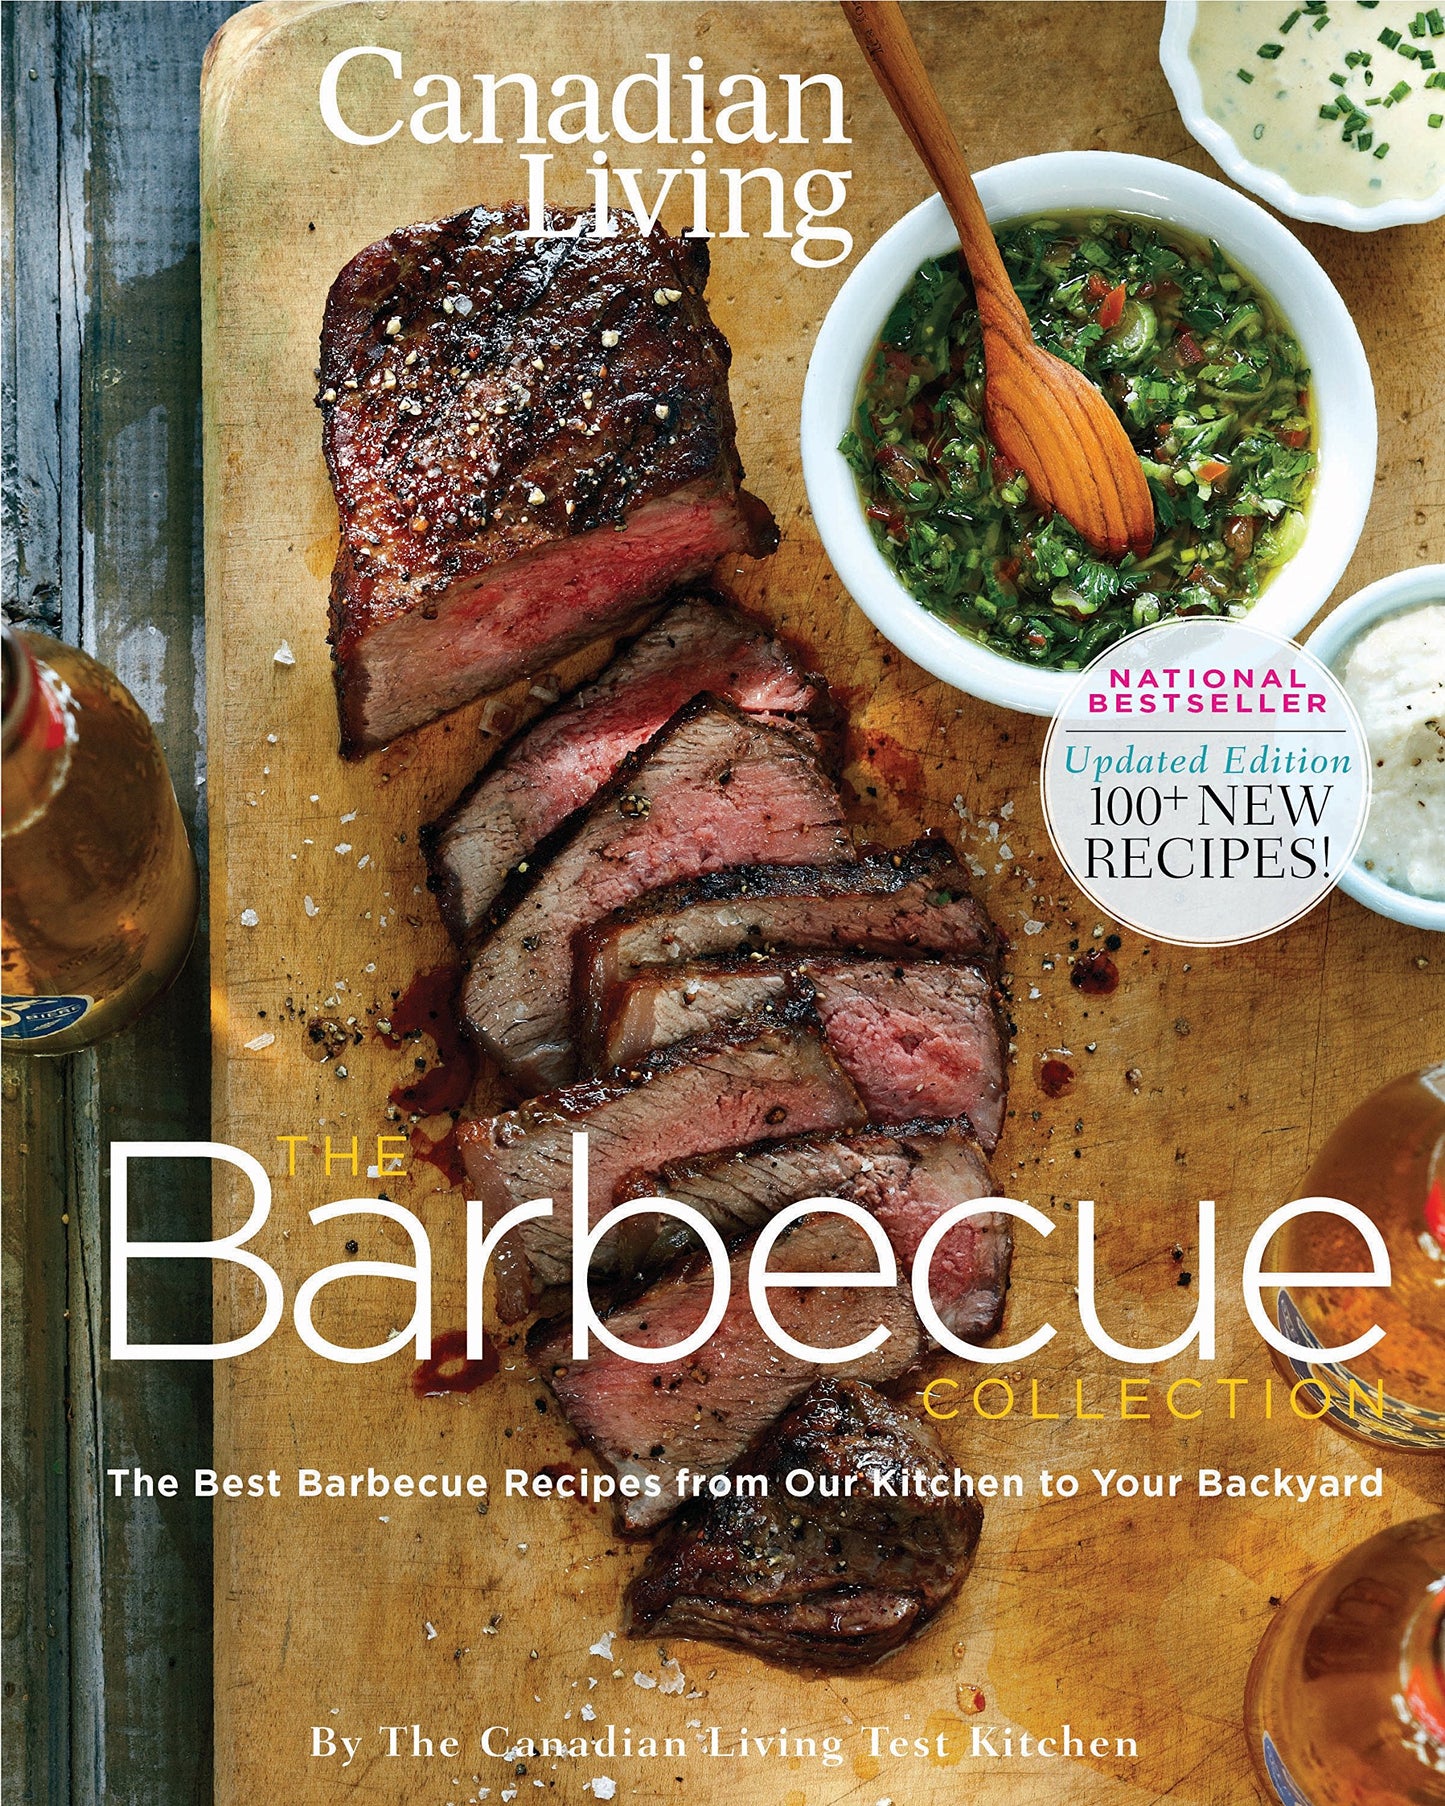 The Barbecue Collection Ed.2